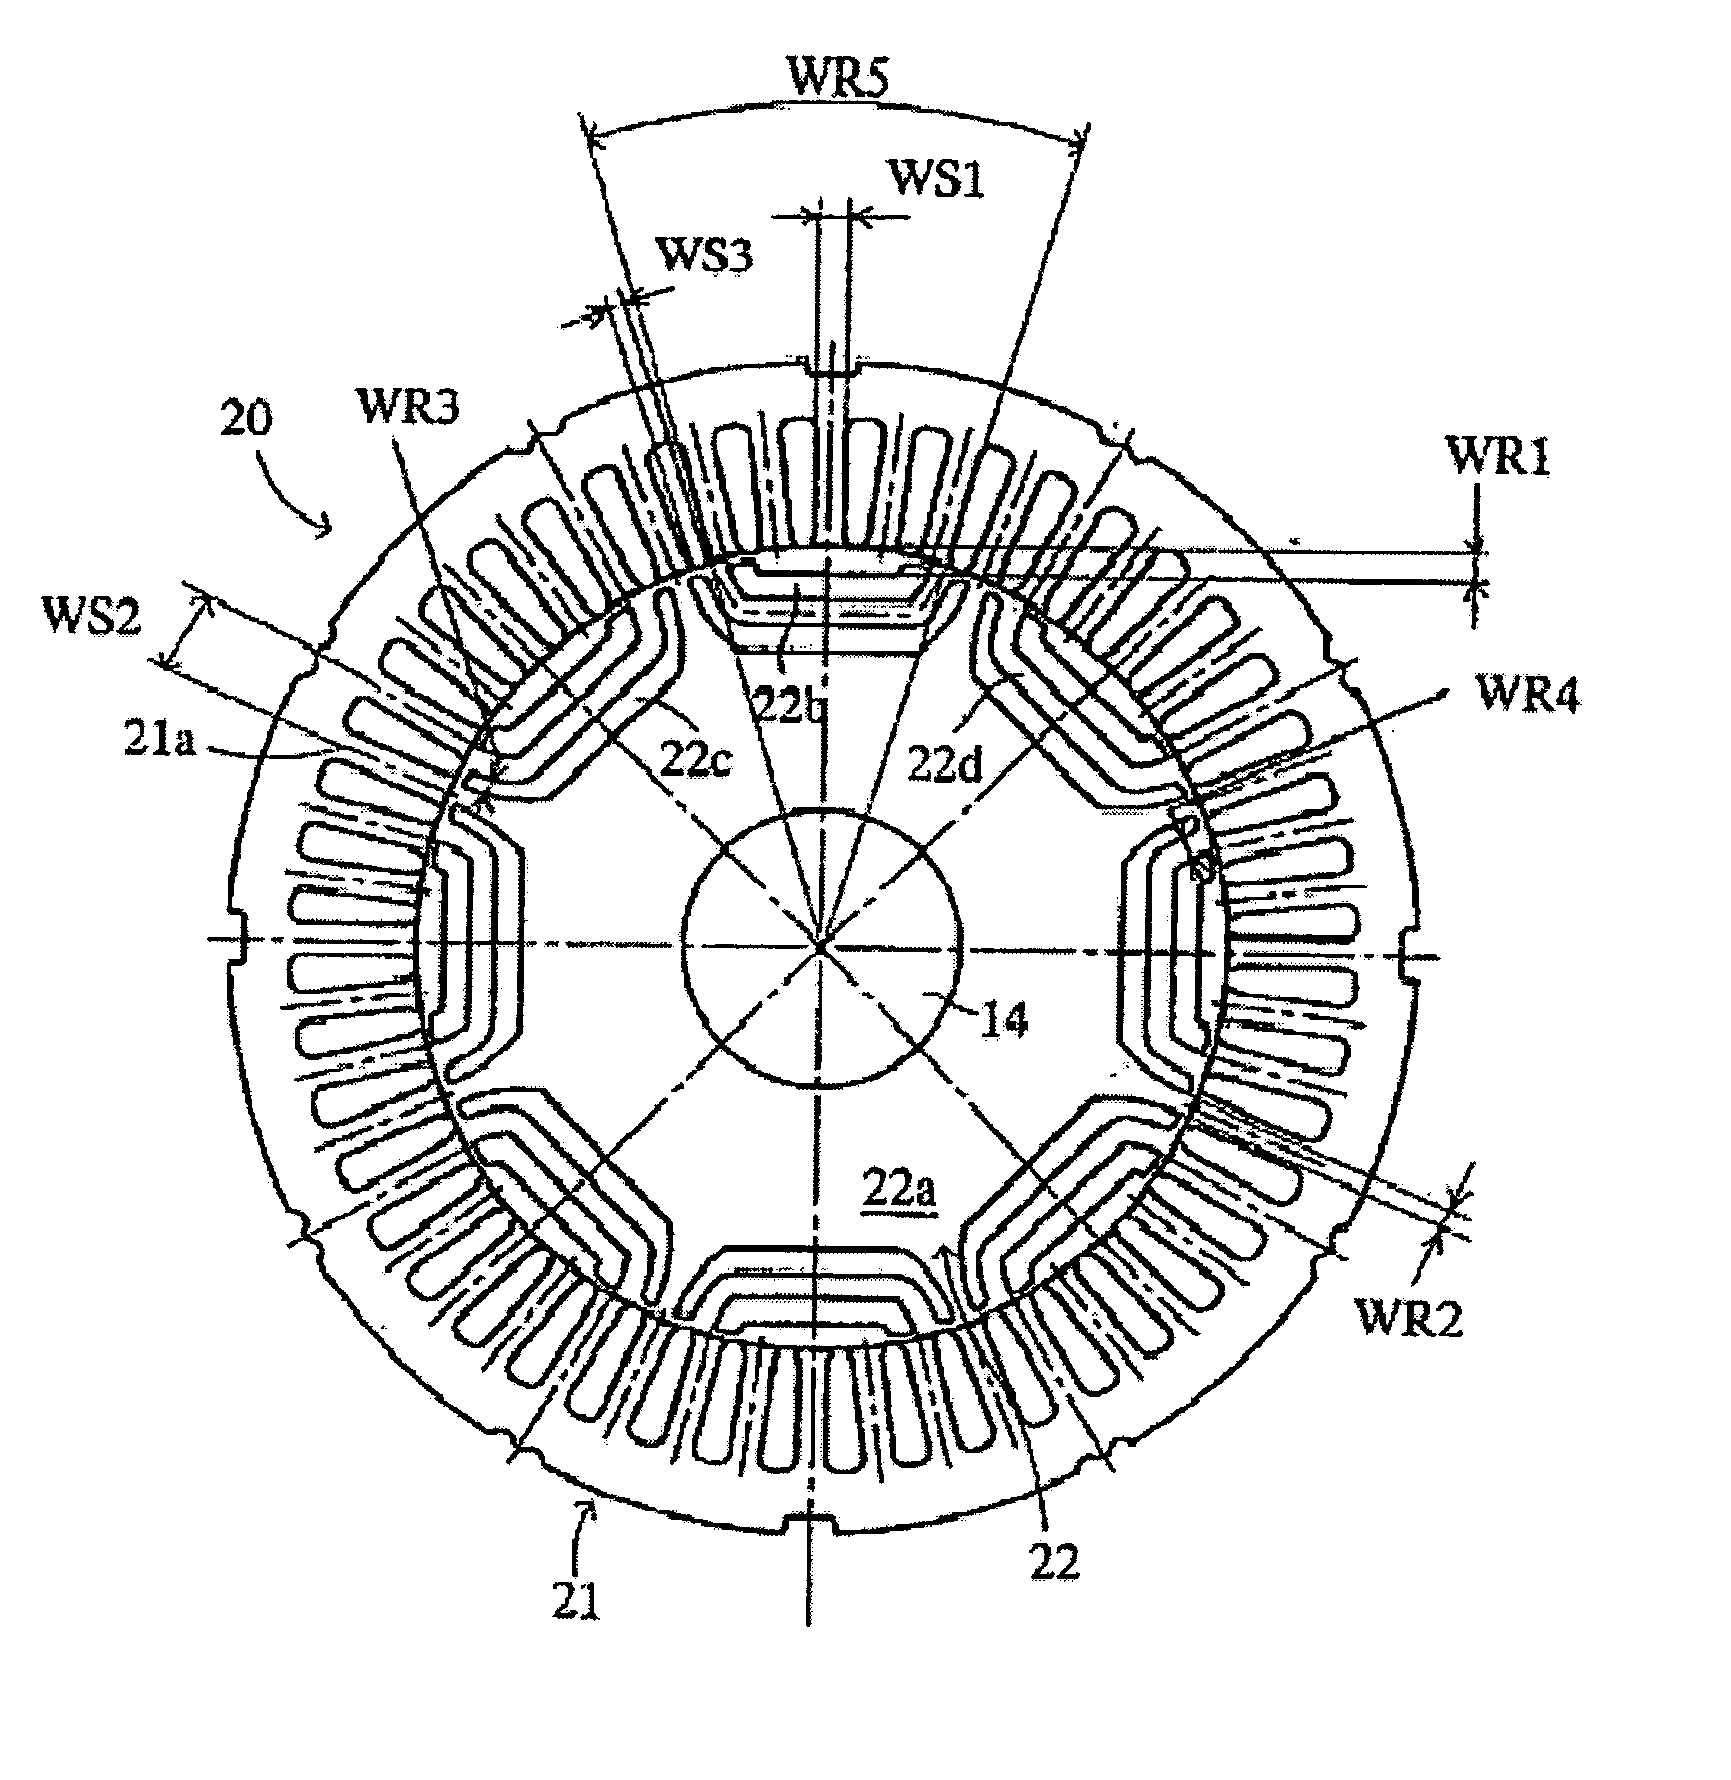 Synchronous reluctance motor